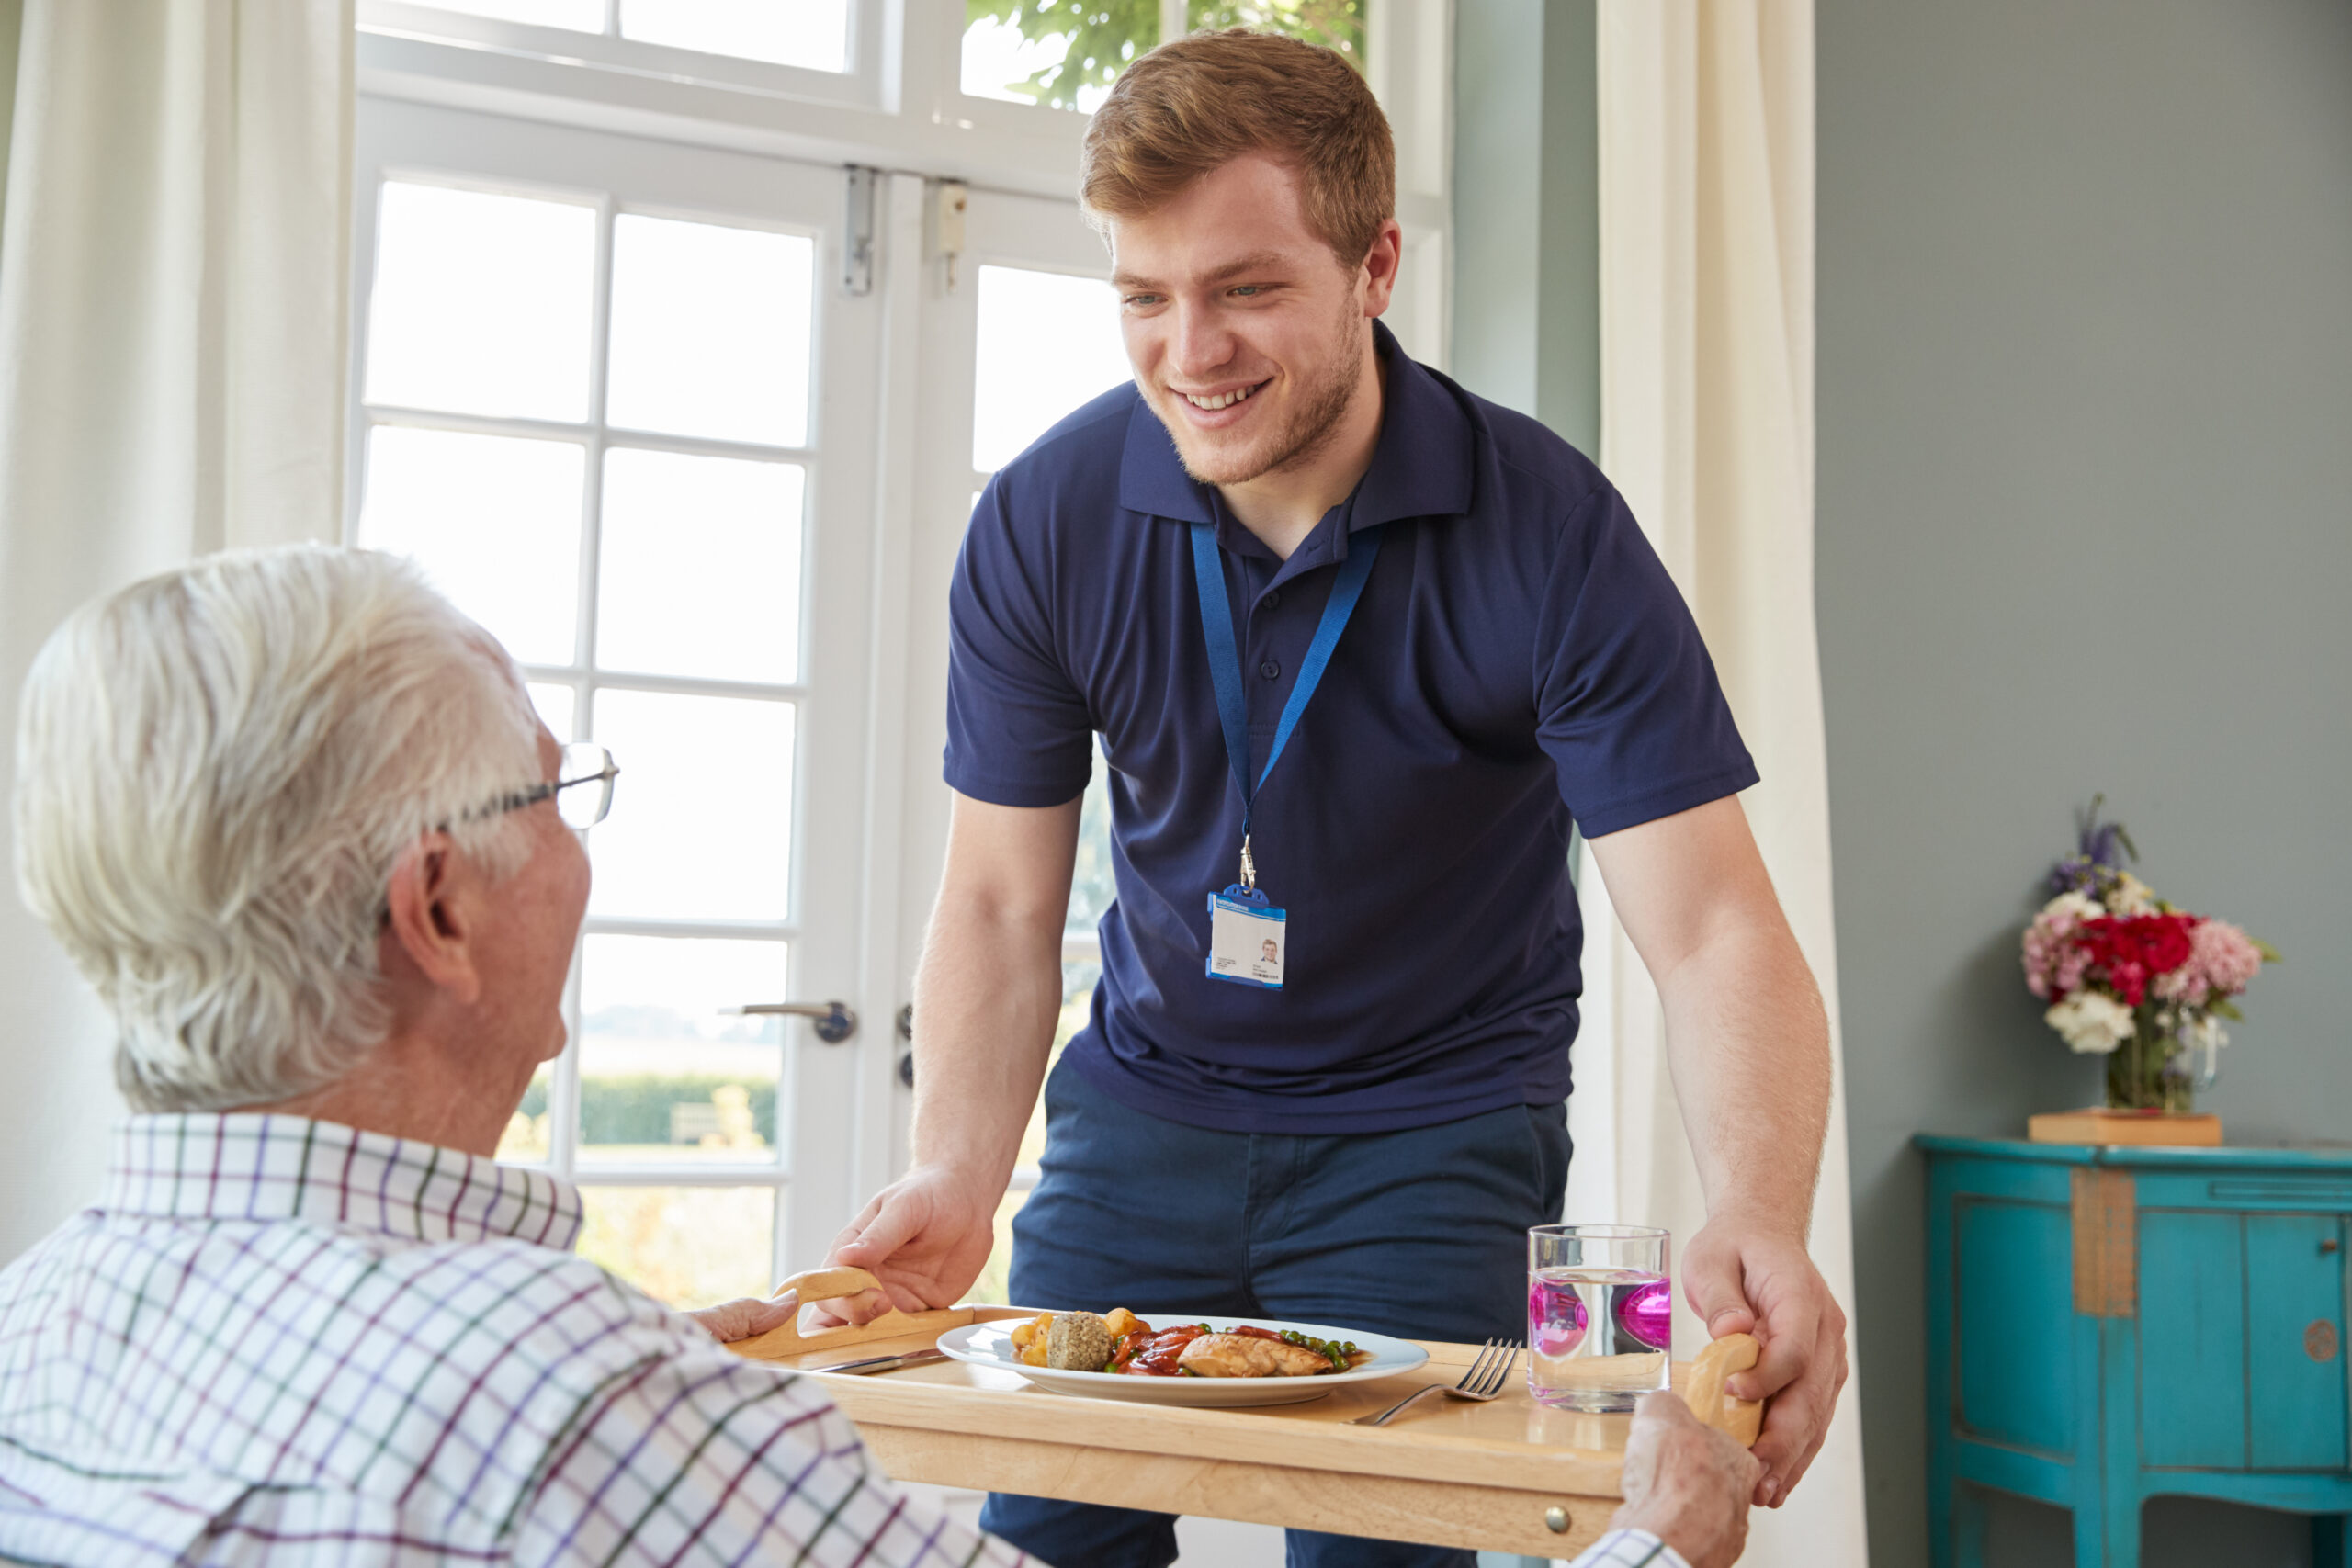 A healthcare worker brings a meal to an elderly client